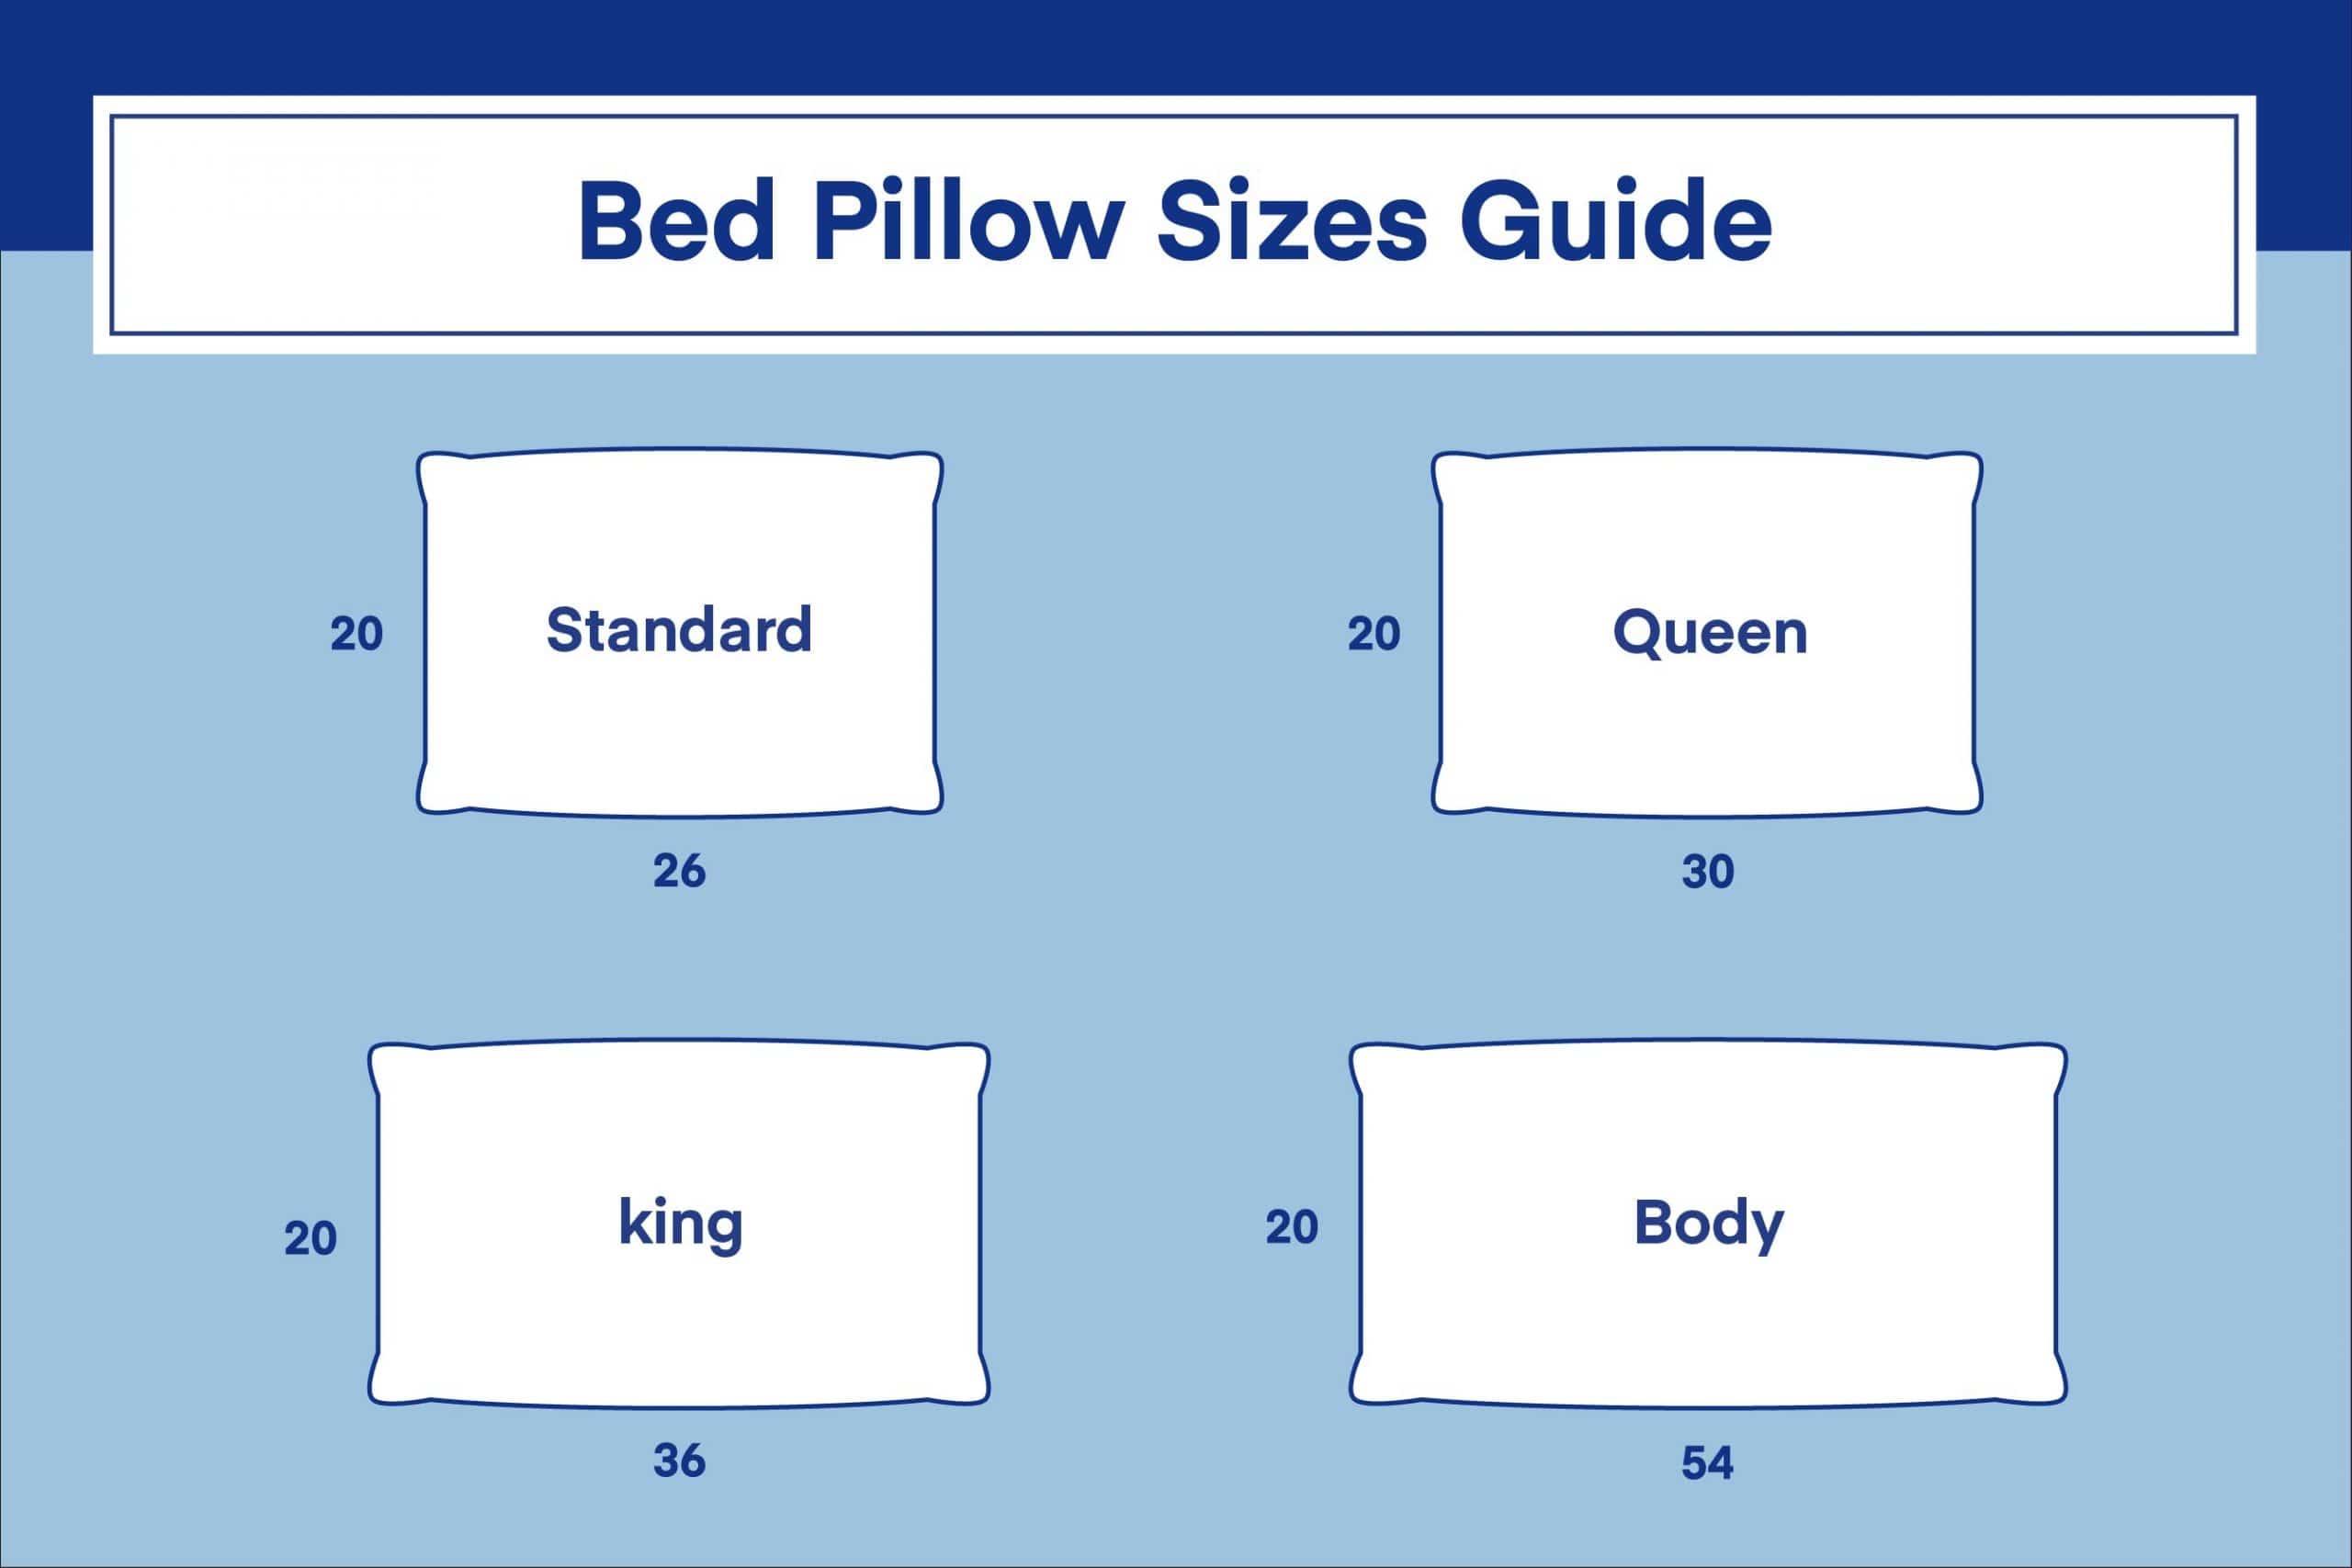 Bed Pillow Sizes and Dimensions Guide